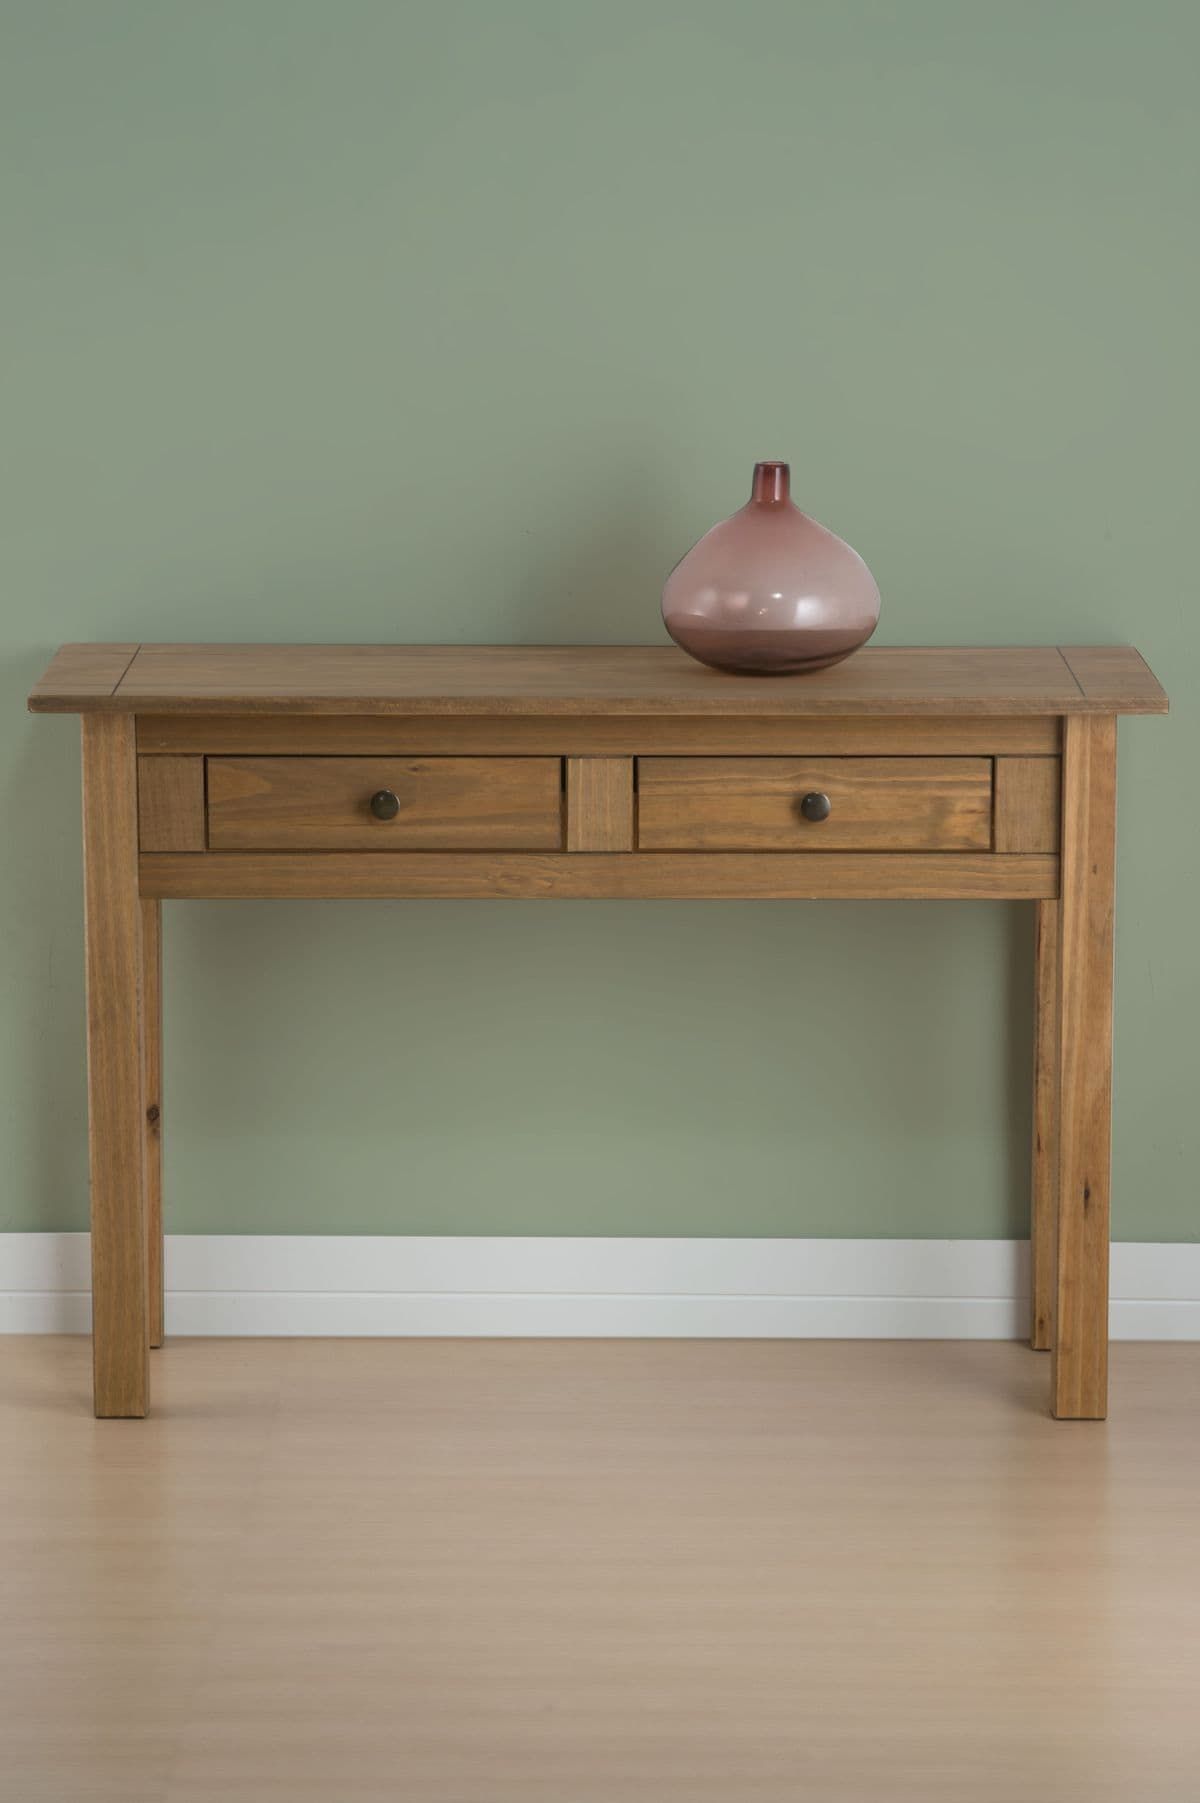 Rustic Wood Santiago 2 Drawer Console Table – Birlea Furniture In 2 Drawer Console Tables (View 7 of 20)